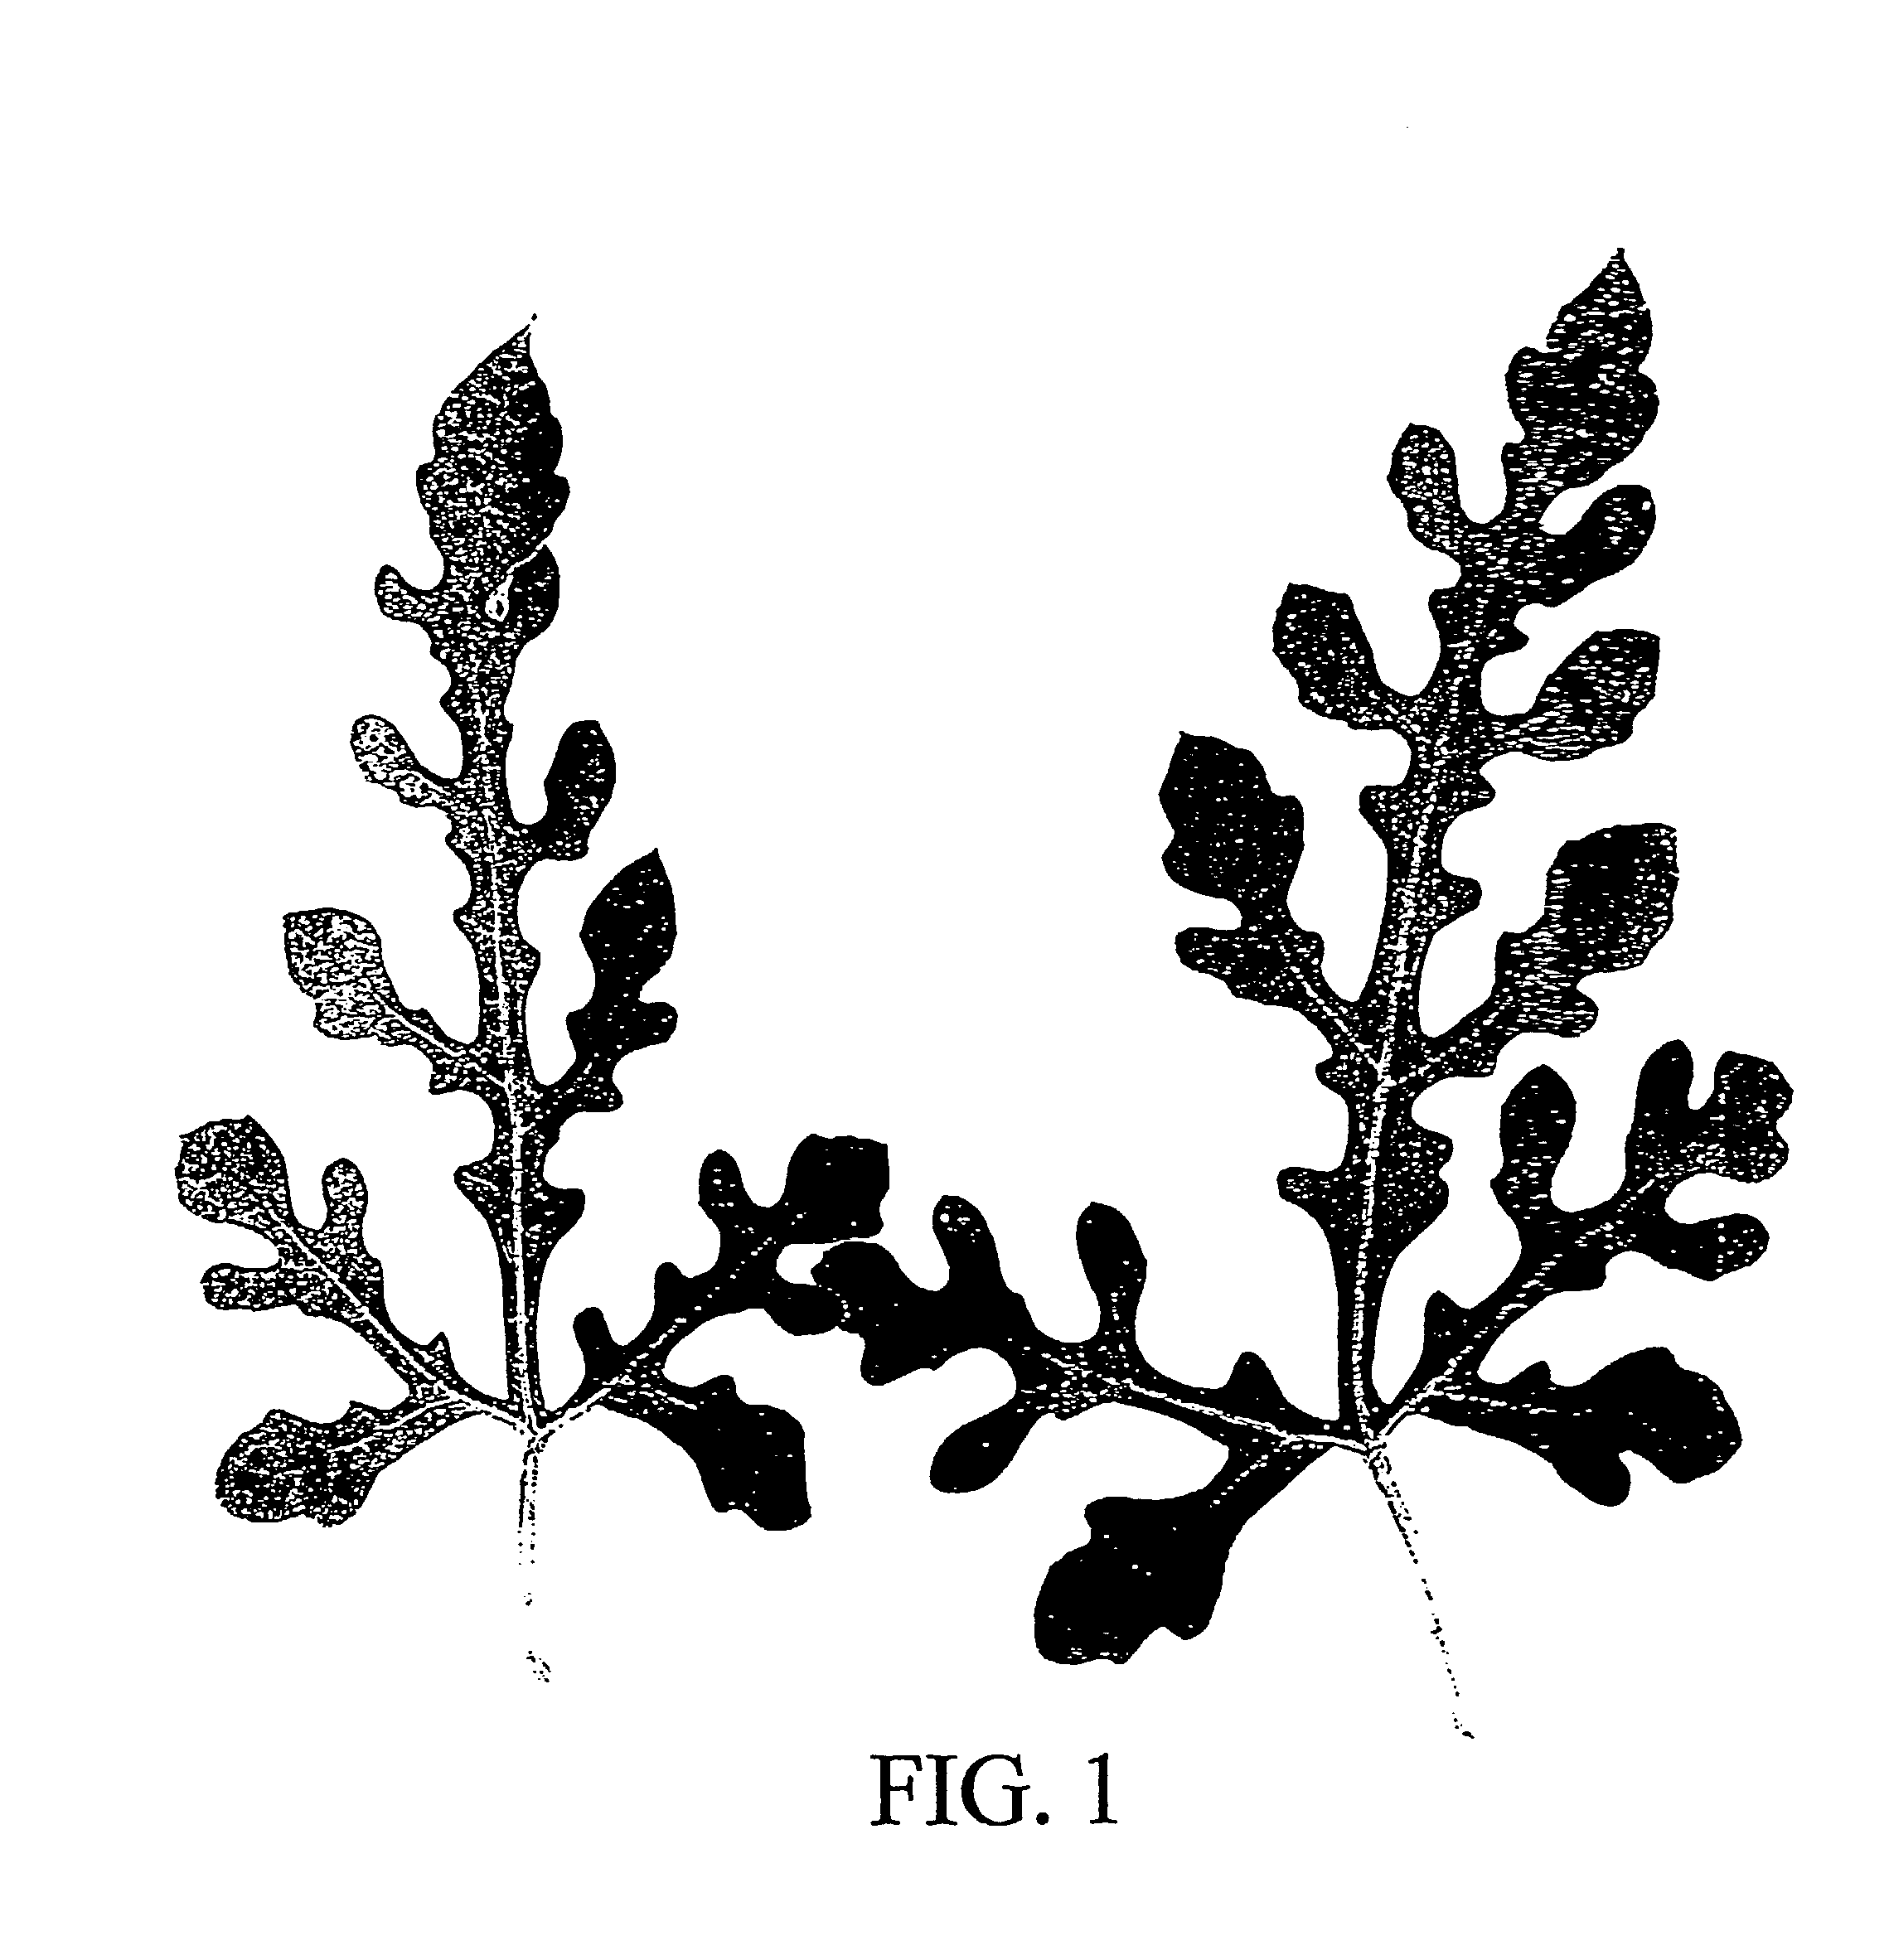 Method for producing triploid, seedless watermelon